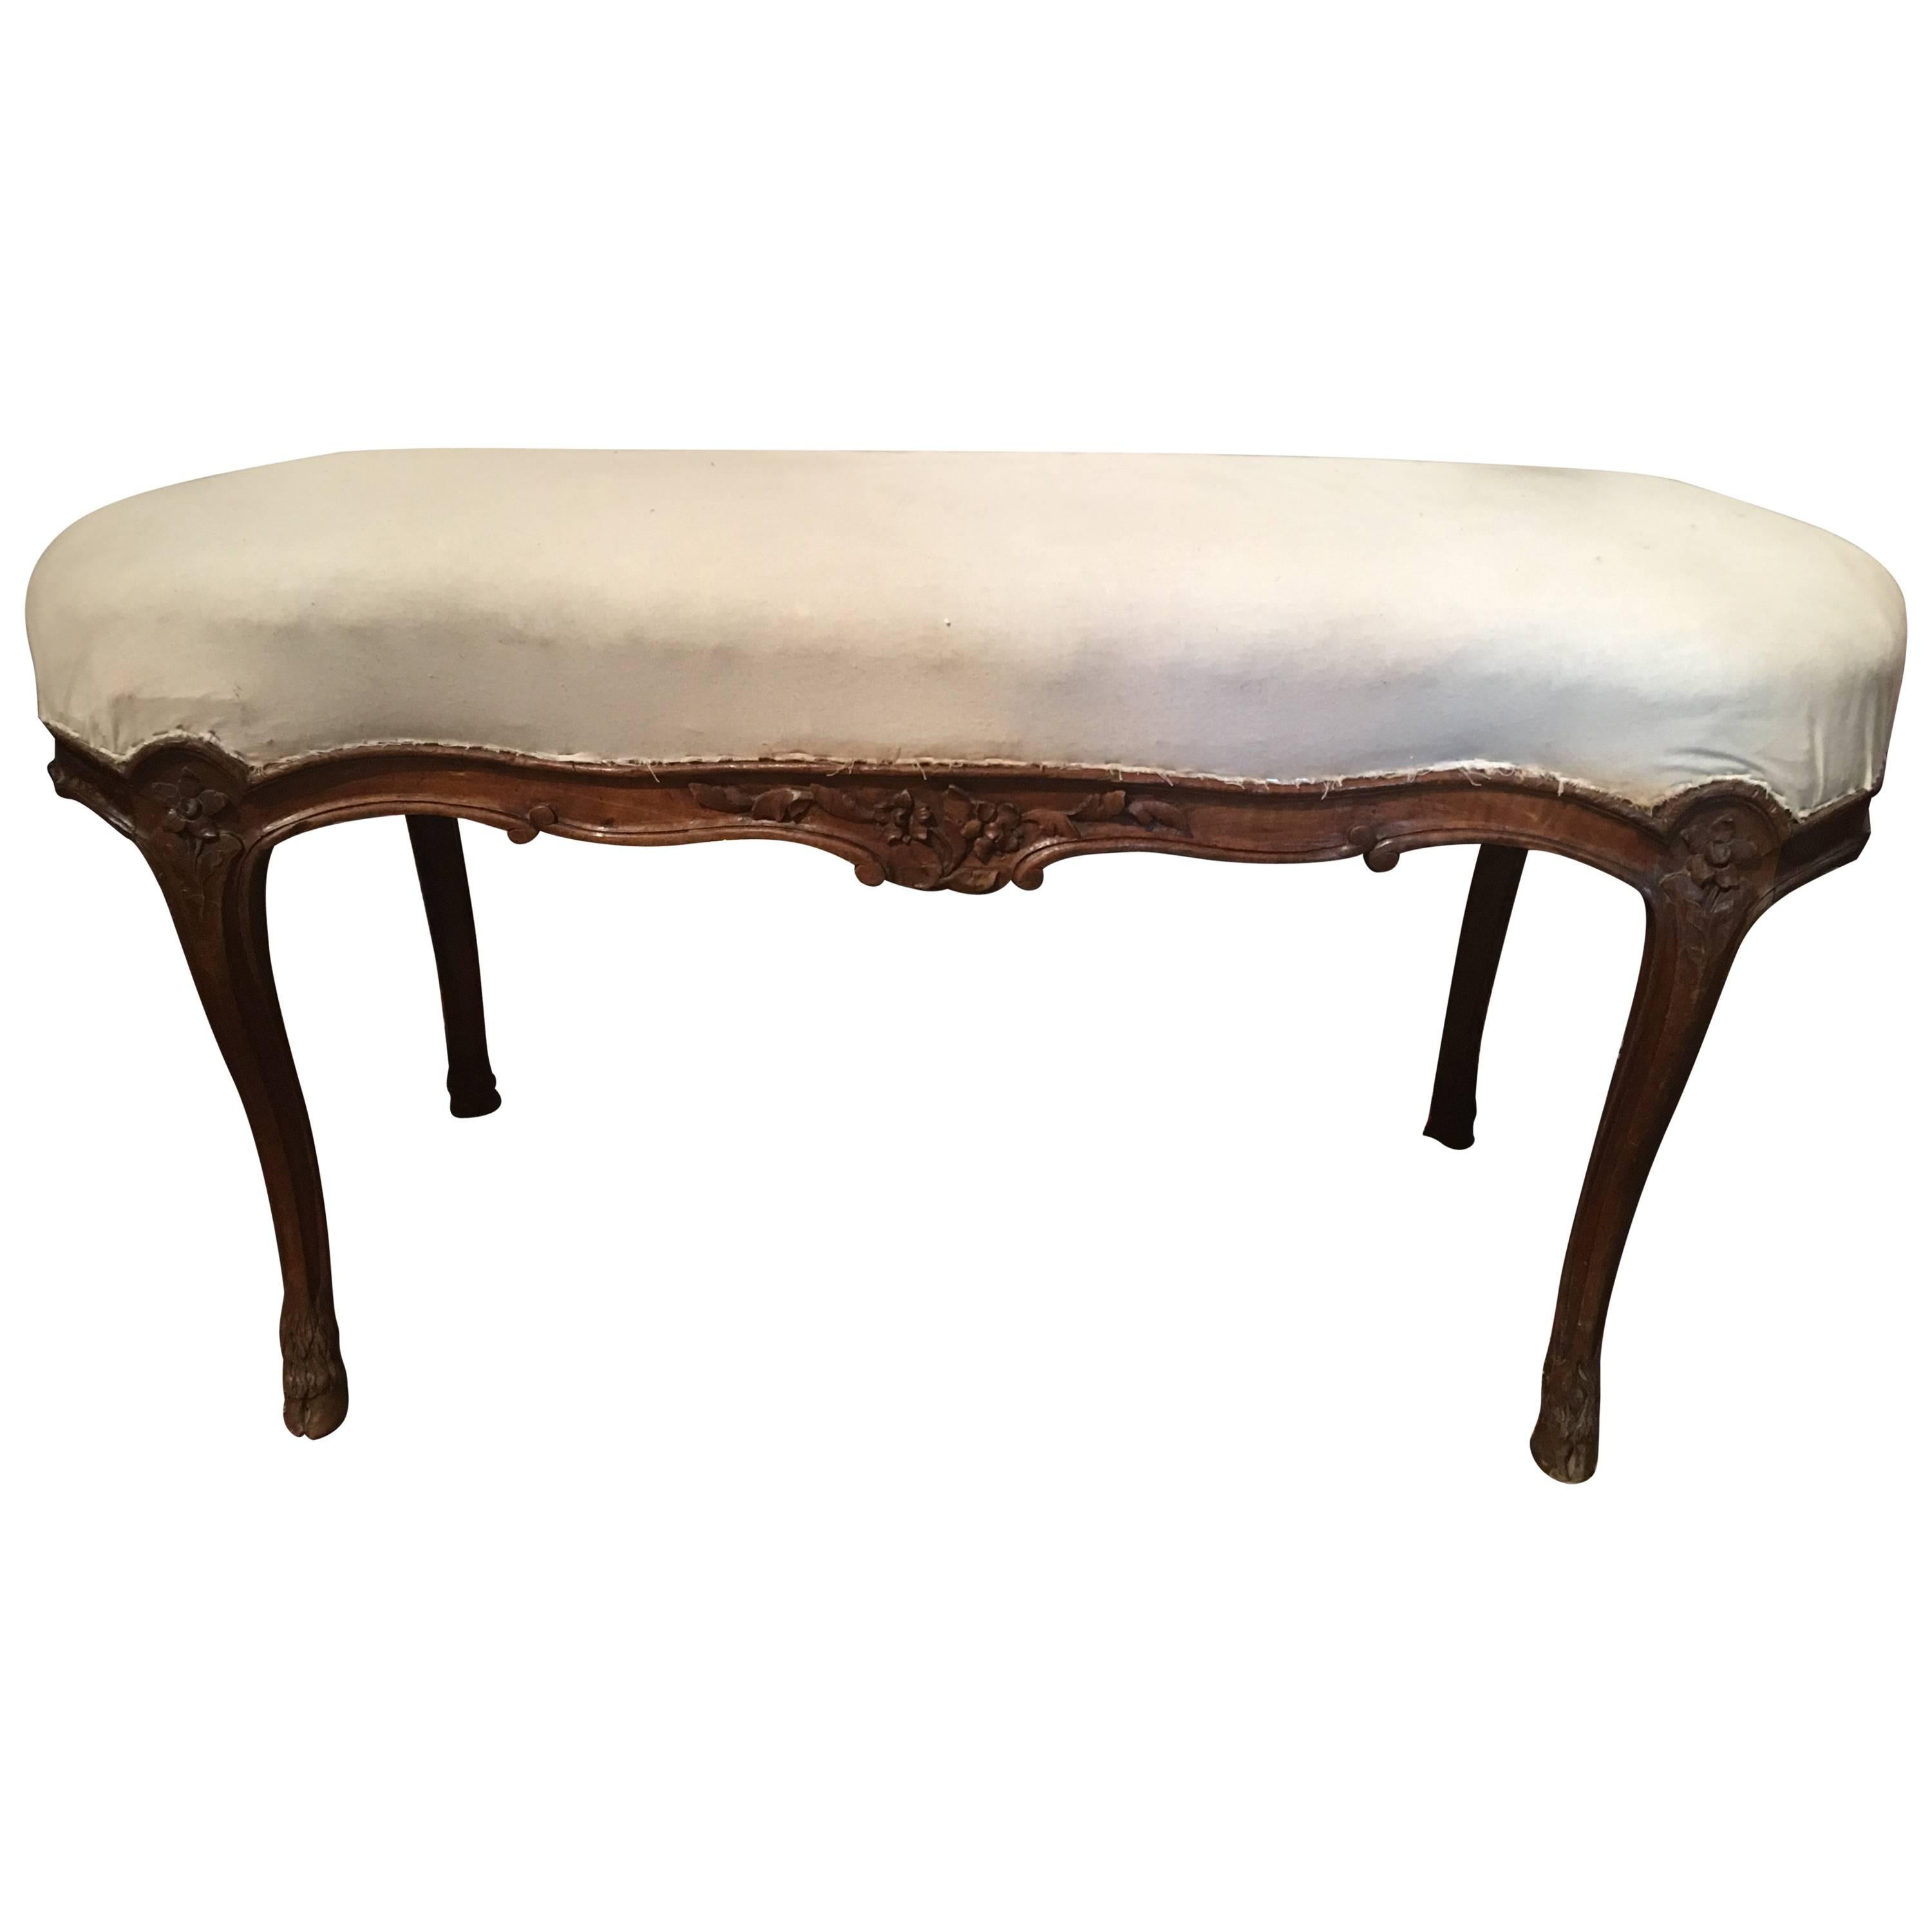 French Walnut Stool with Hoof Feet and Decorative Carvings, 19th Century